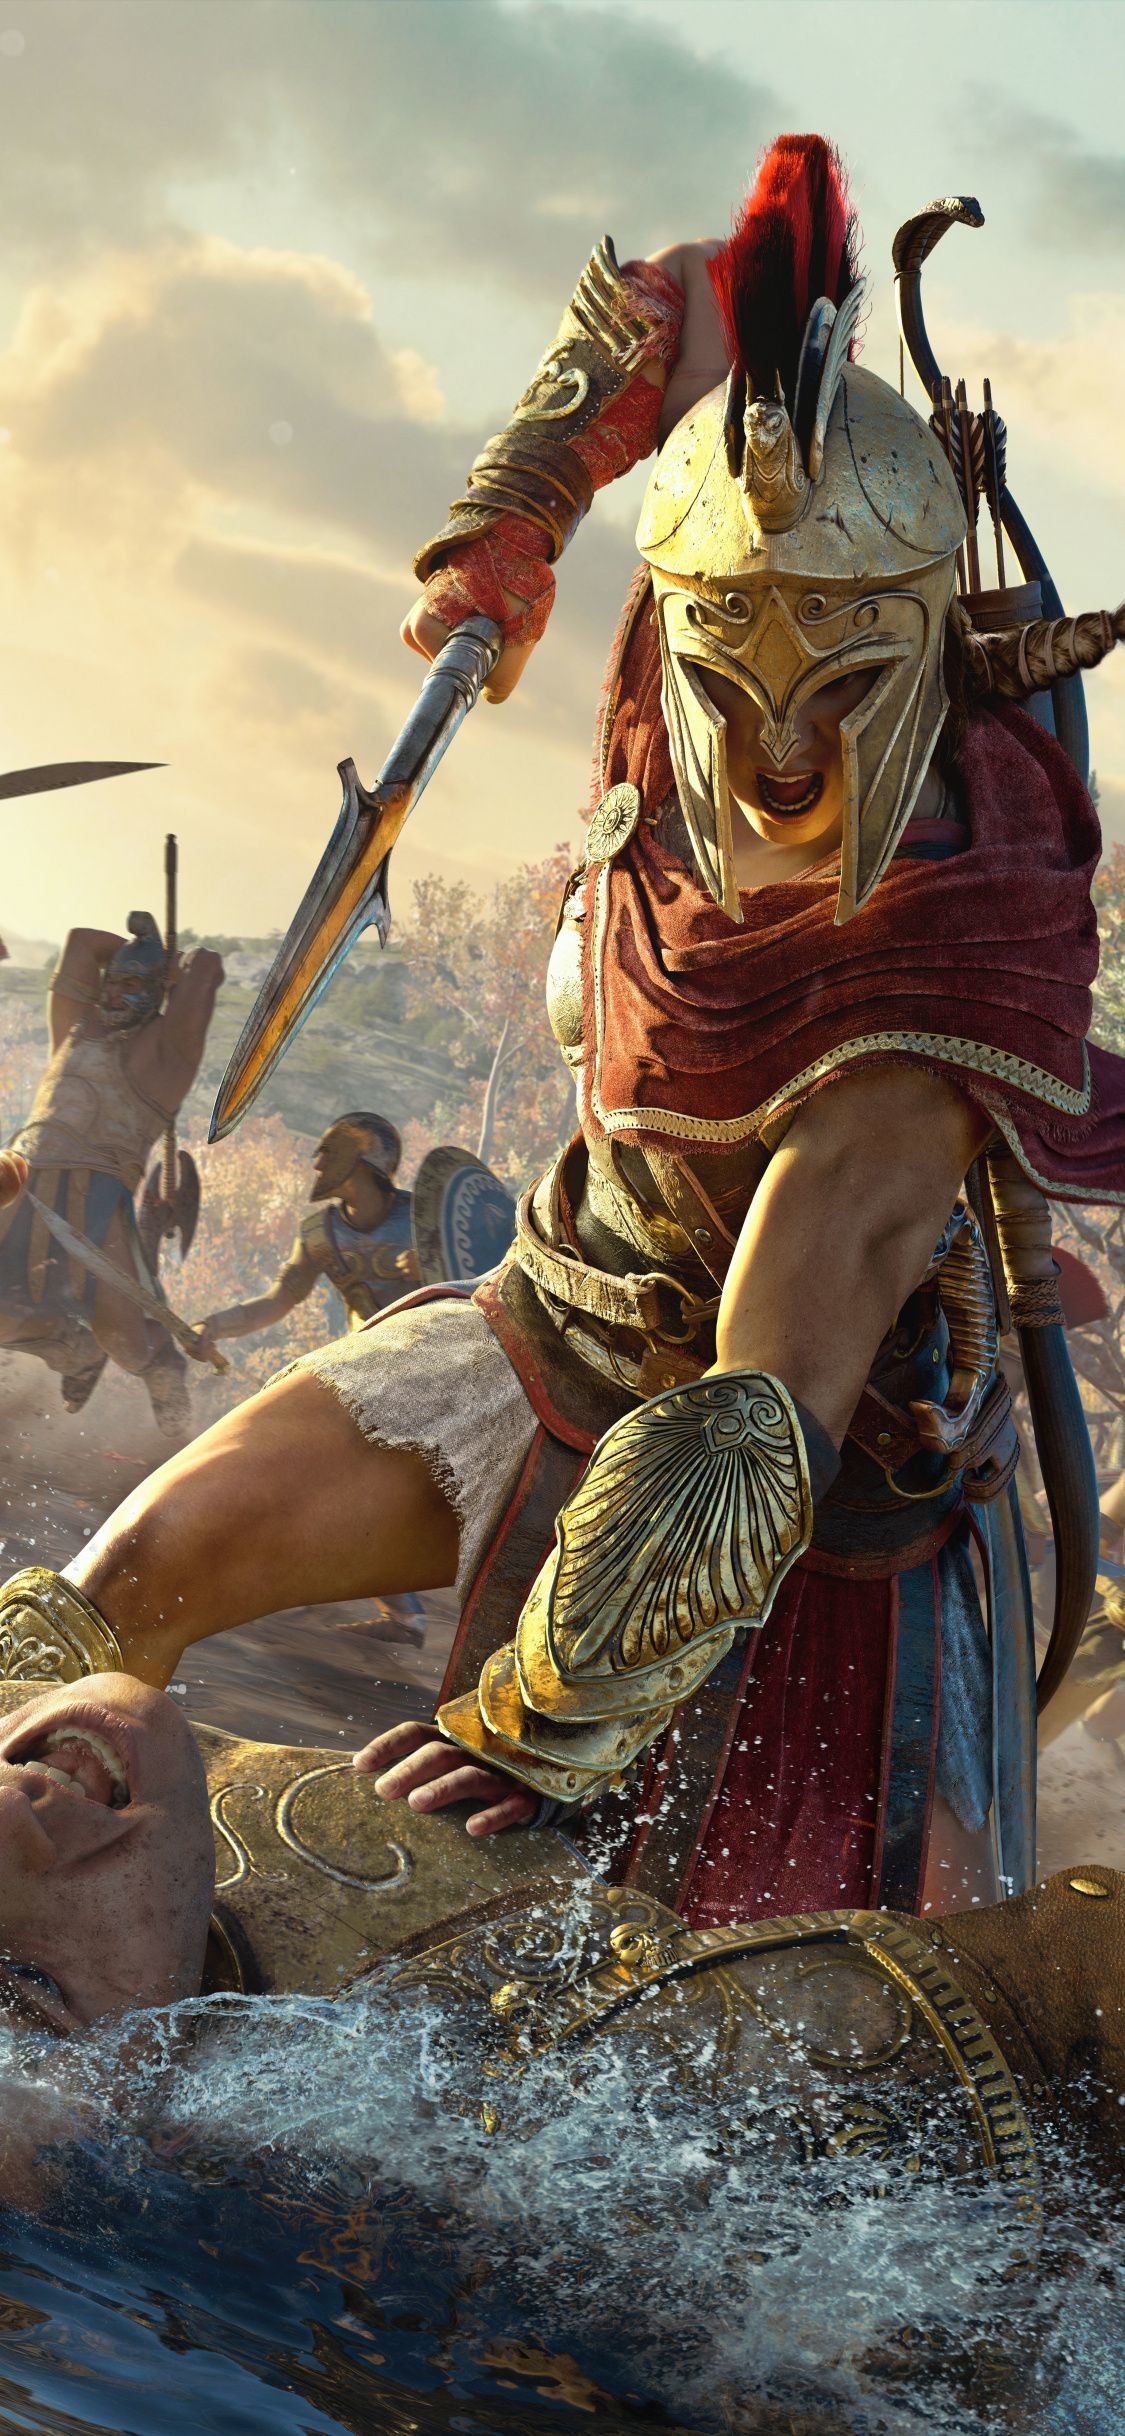 Spartan Warriors or Monsters? A Look At Who They Really Were